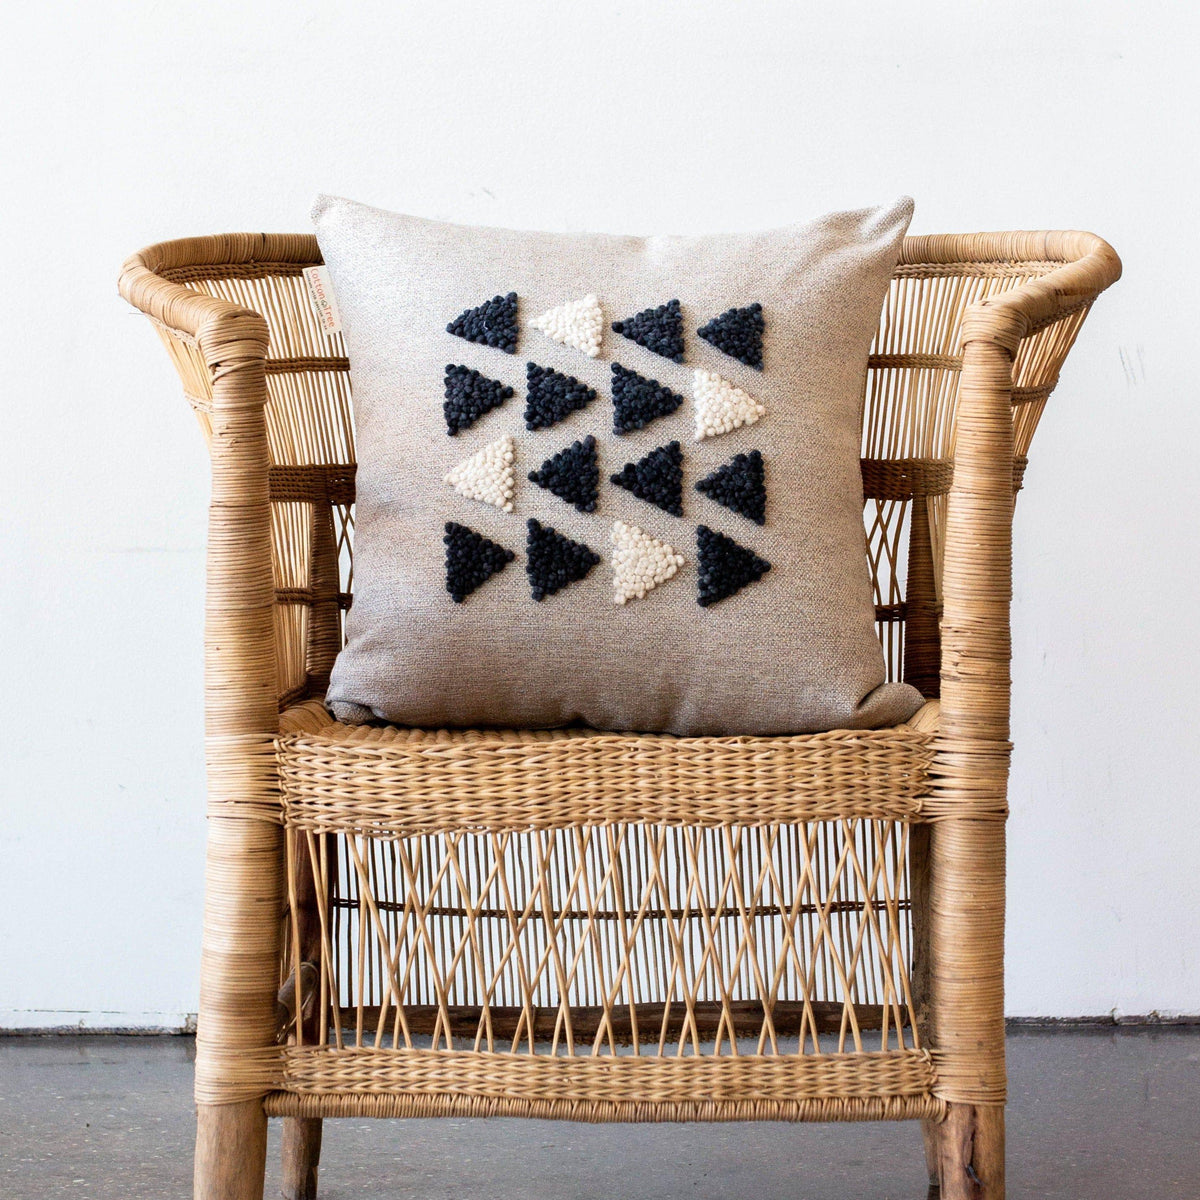 AfriScandi Harvest Pillow kanju interiors African décor handmade natural organic color accent pillow cushion throw decorative lounge comfortable comfy unique modern contemporary stylish soft accent durable minimal couch chair bed handmade luxury thick plush yarn texture punch needle knitting simplicity original embroidered South Africa quality cotton cream black white triangles geometric